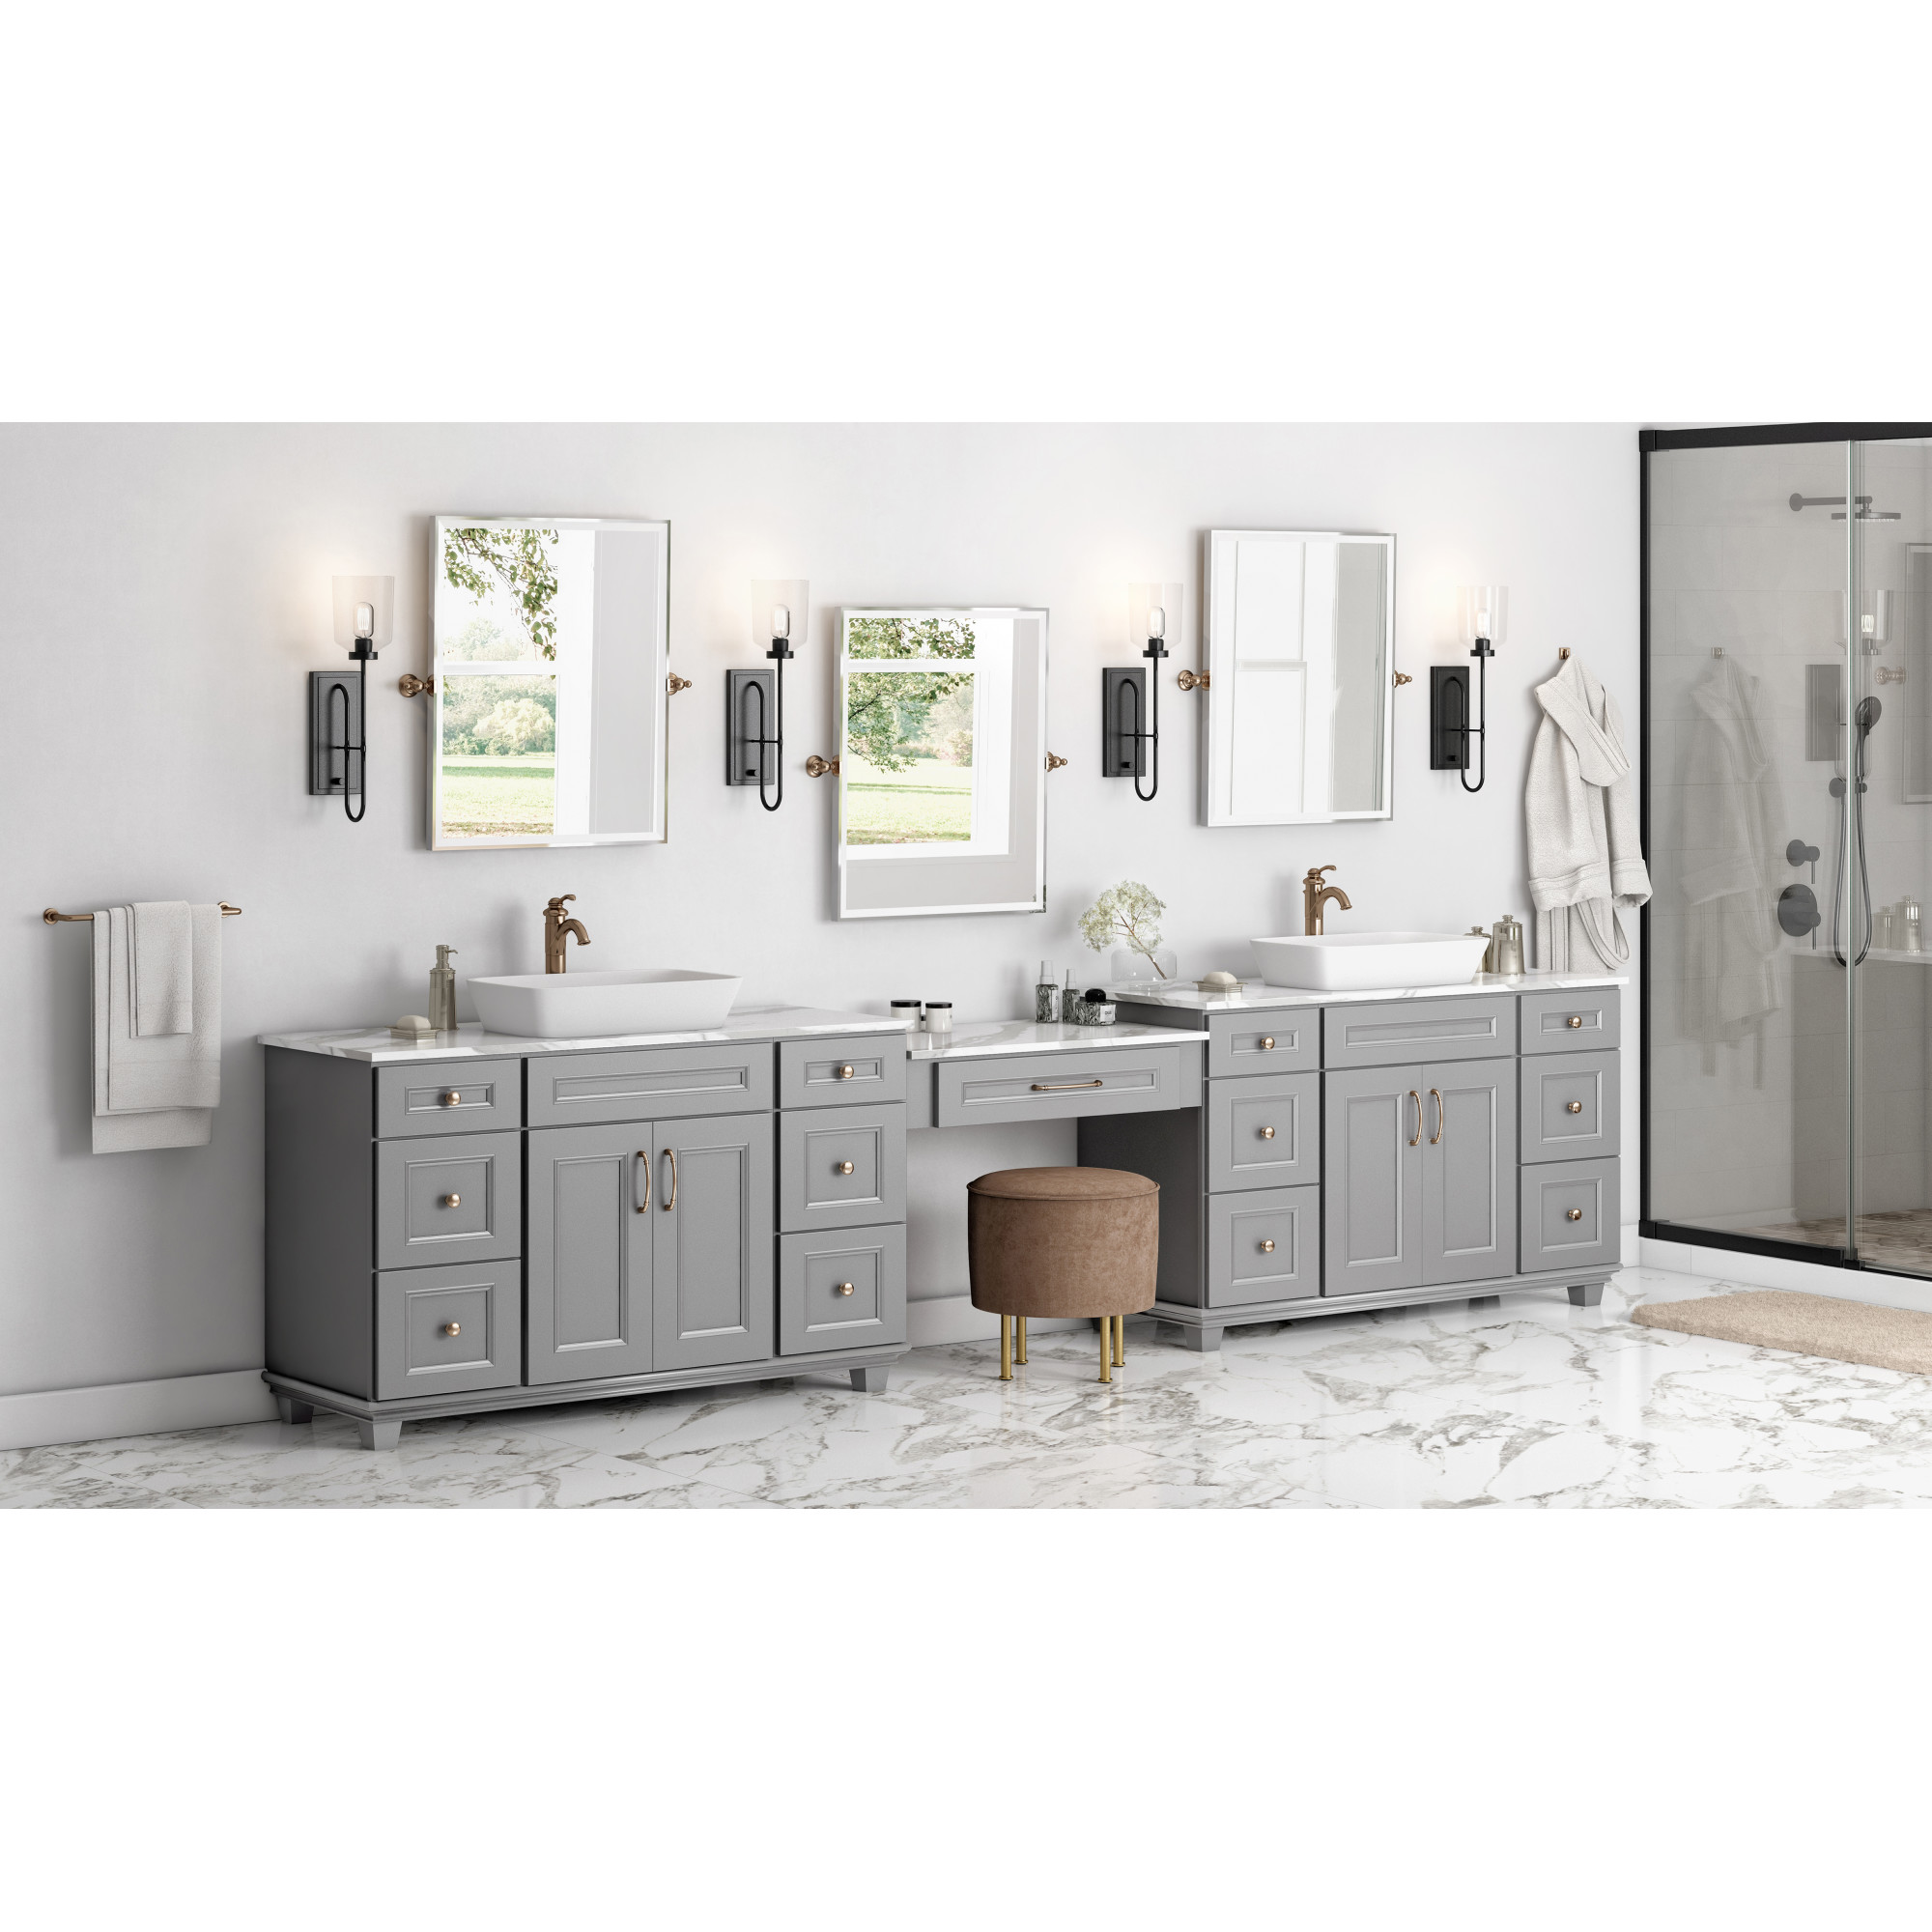 Purchasing Vanity Cabinet Hardware at French Creek Designs Kitchen & Bath Store Casper, WY Cabinets, Countertops, Cabinet Lighting